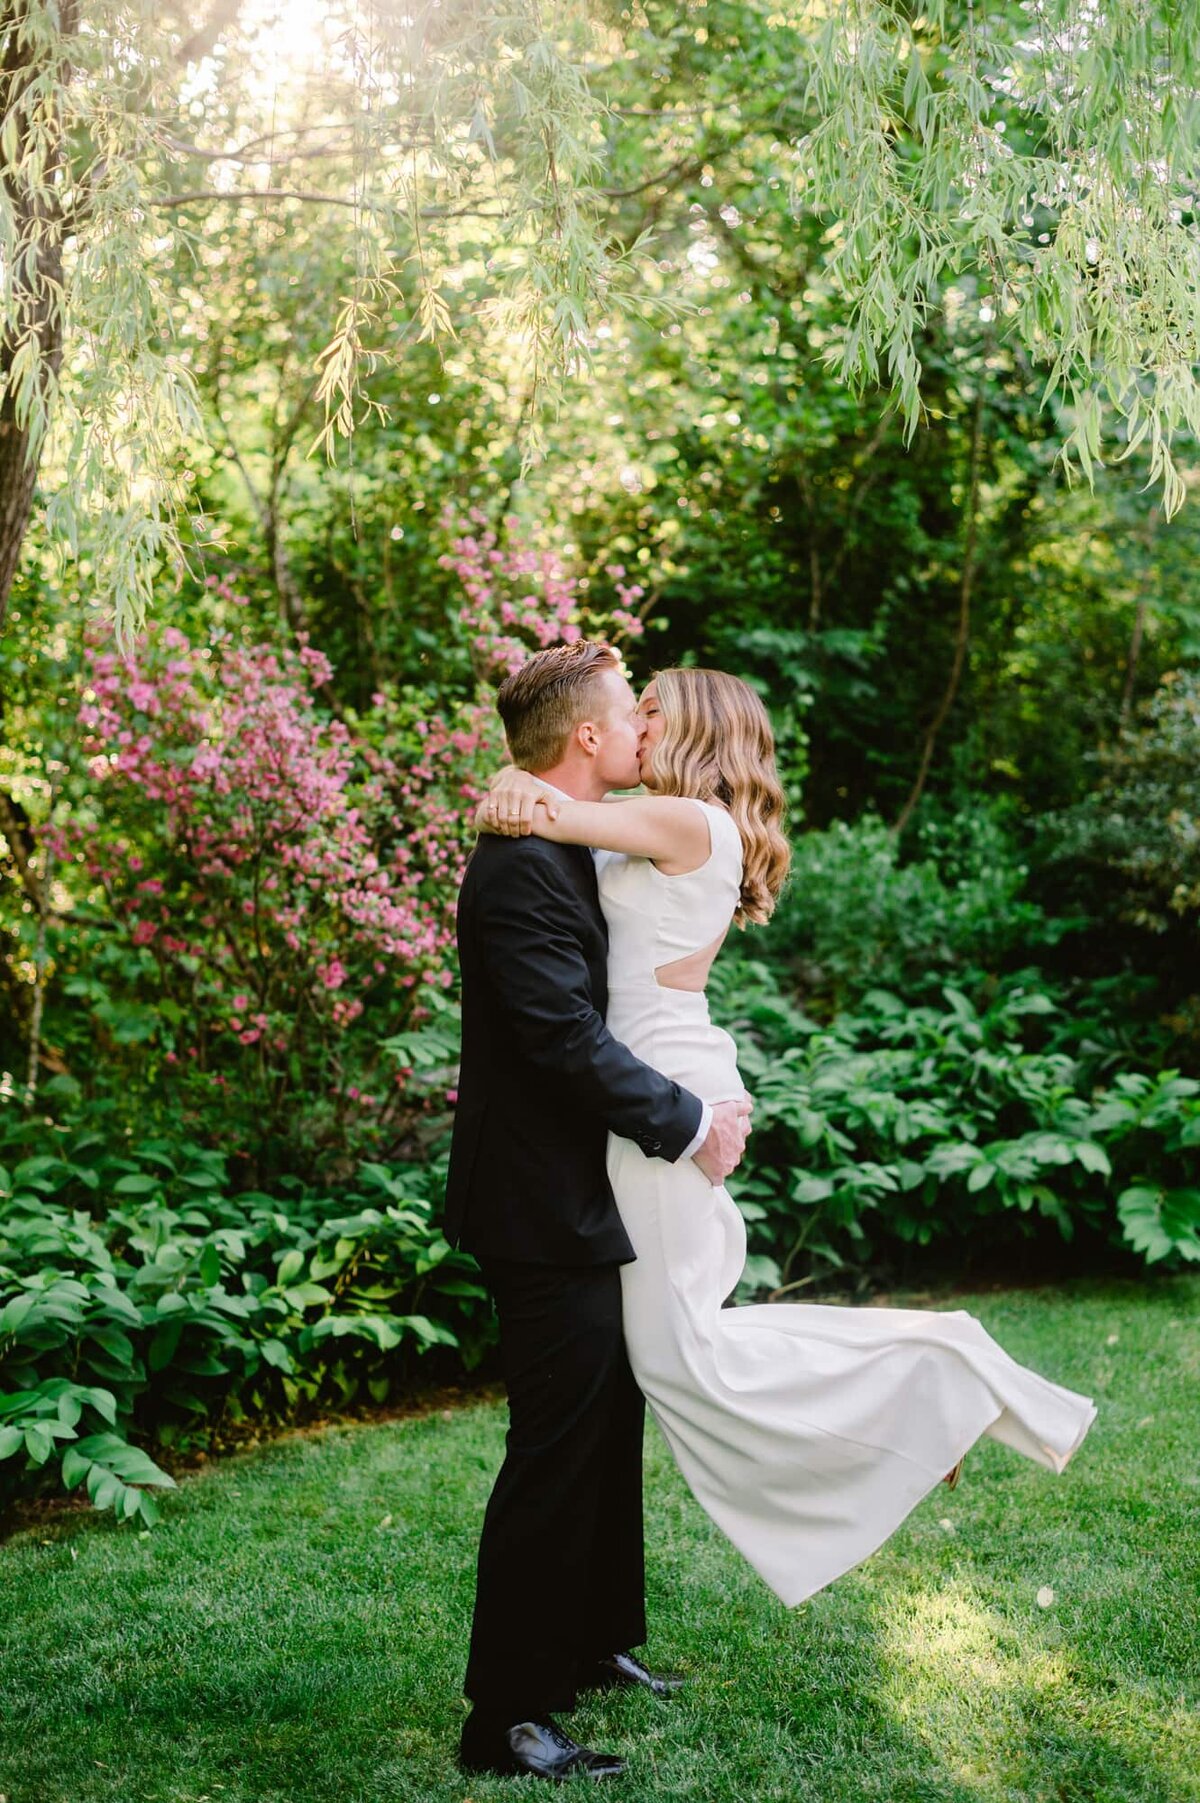 Groom lifts up bride for kiss in intimate gardens at Clifton Inn Charlottesville wedding